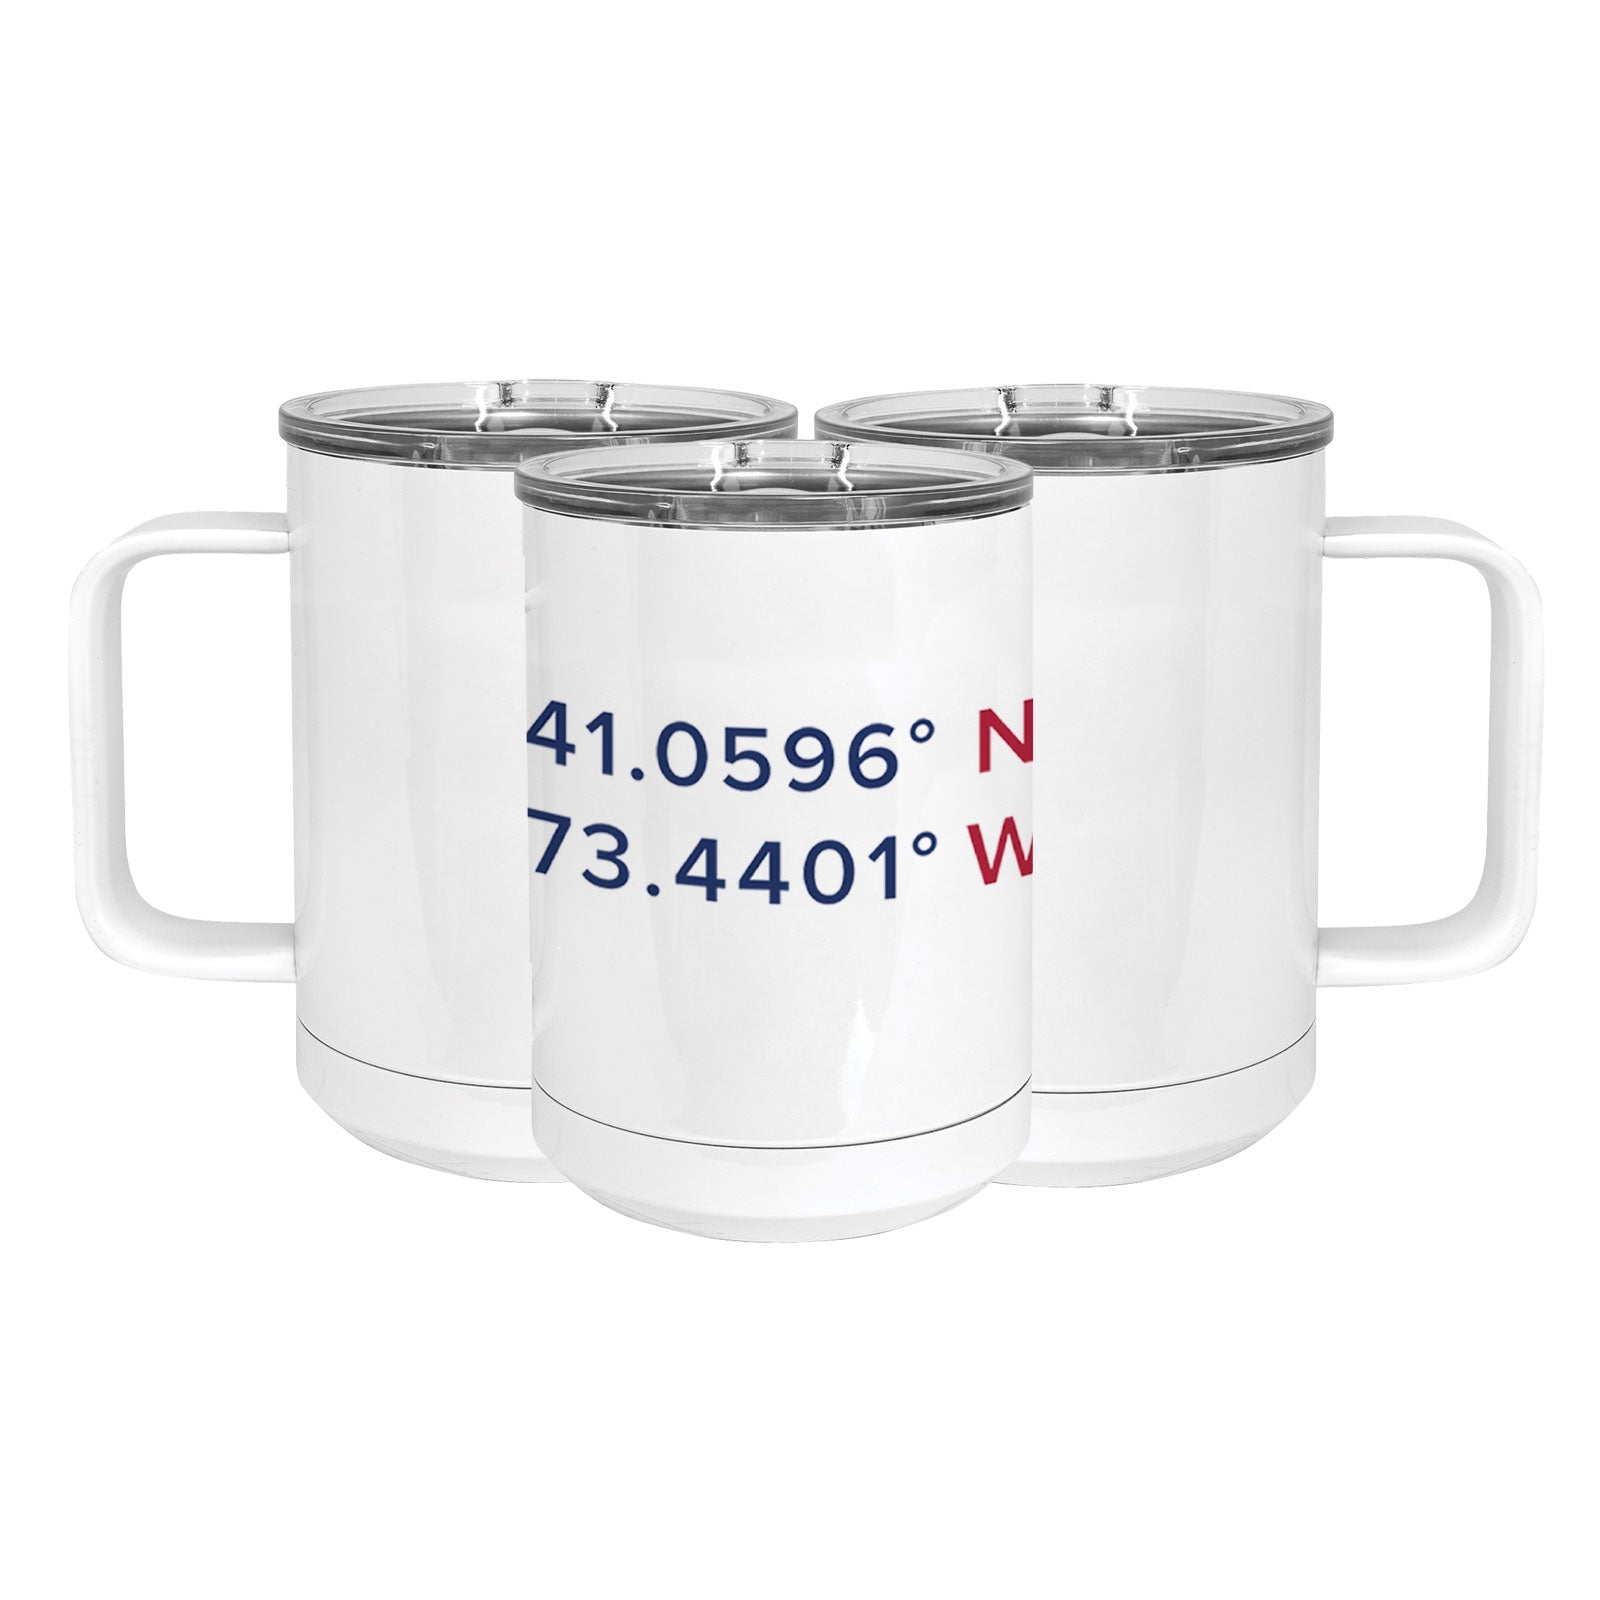 Roton Point Stainless Steel Coffee Mug with Lid - Three Designs